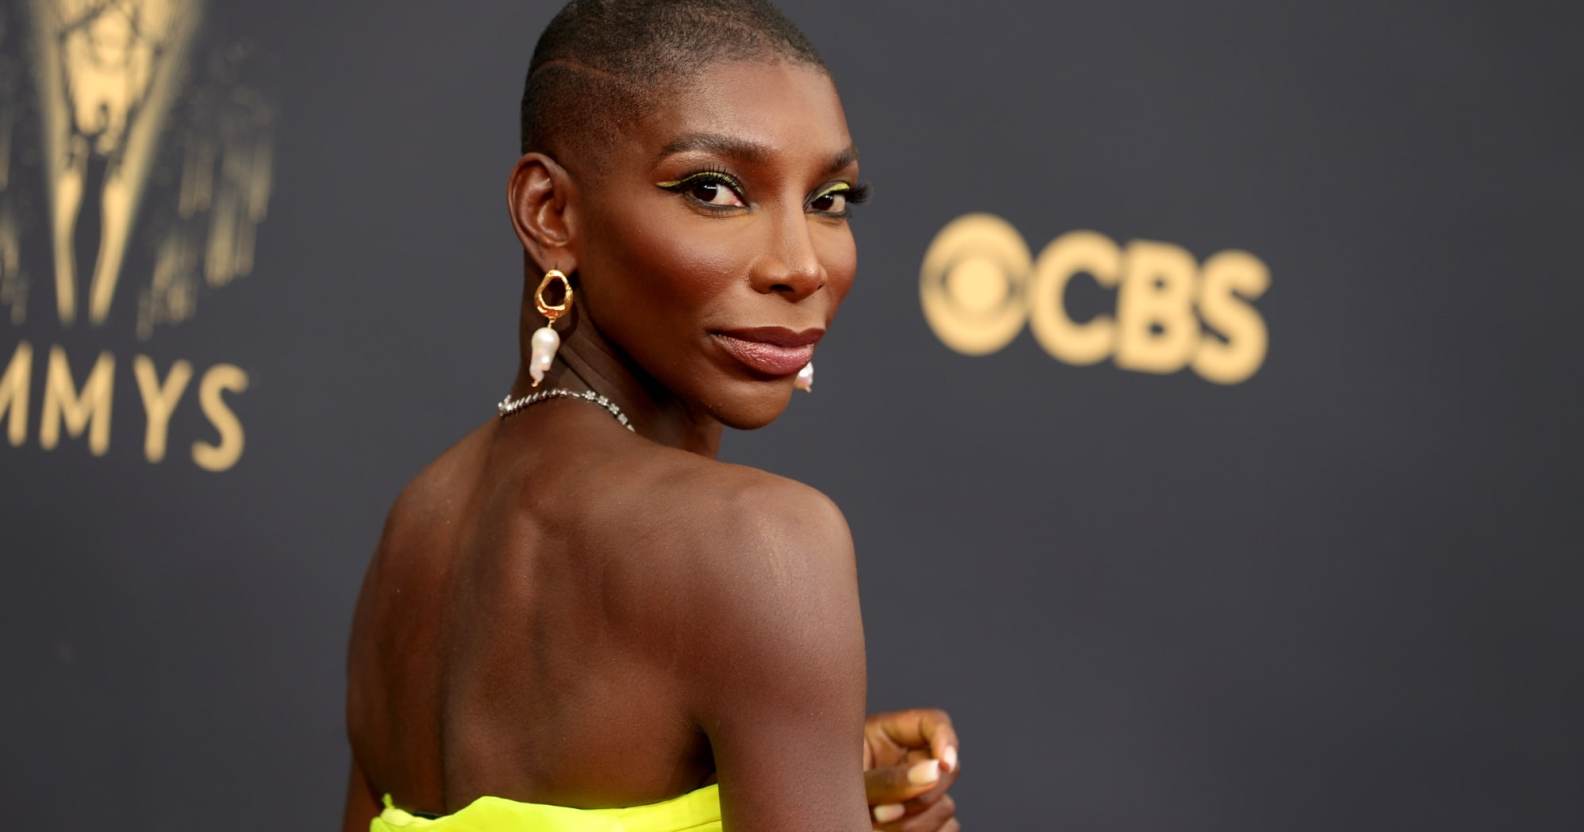 A photo shows actor Michaela Coel wearing a bright yellow dress as she poses for the camera at a red carpet event . (Getty)